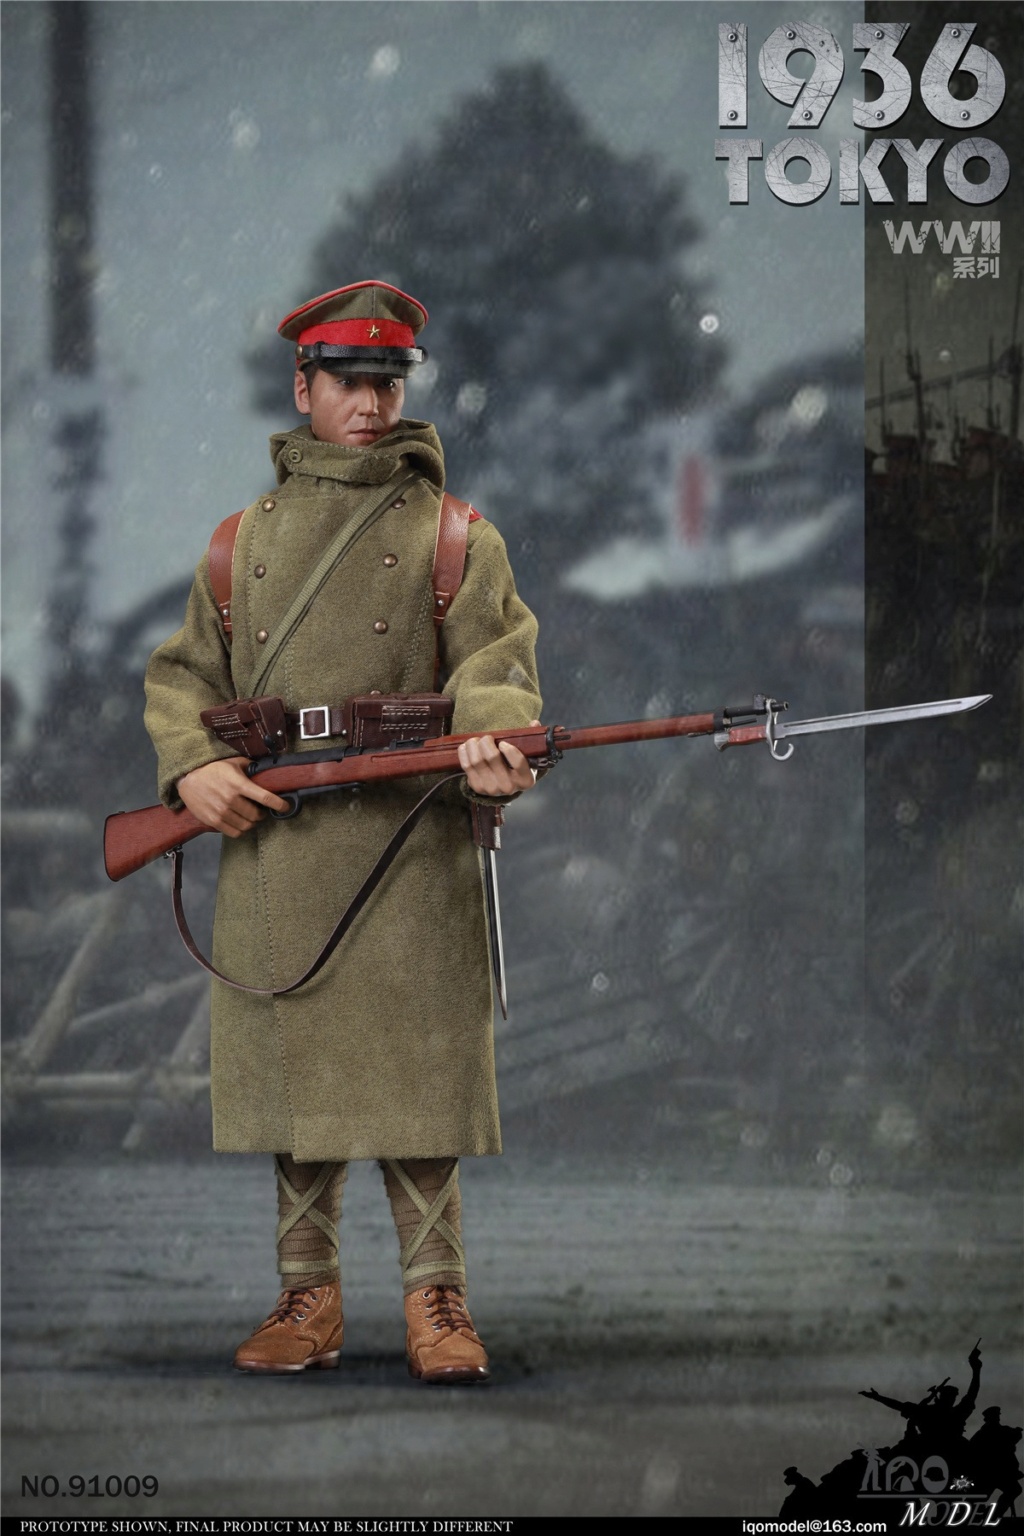 Tokyo - NEW PRODUCT: IQO Model: 1/6 WWII Series 1936 Tokyo (NO.91009) 15463613